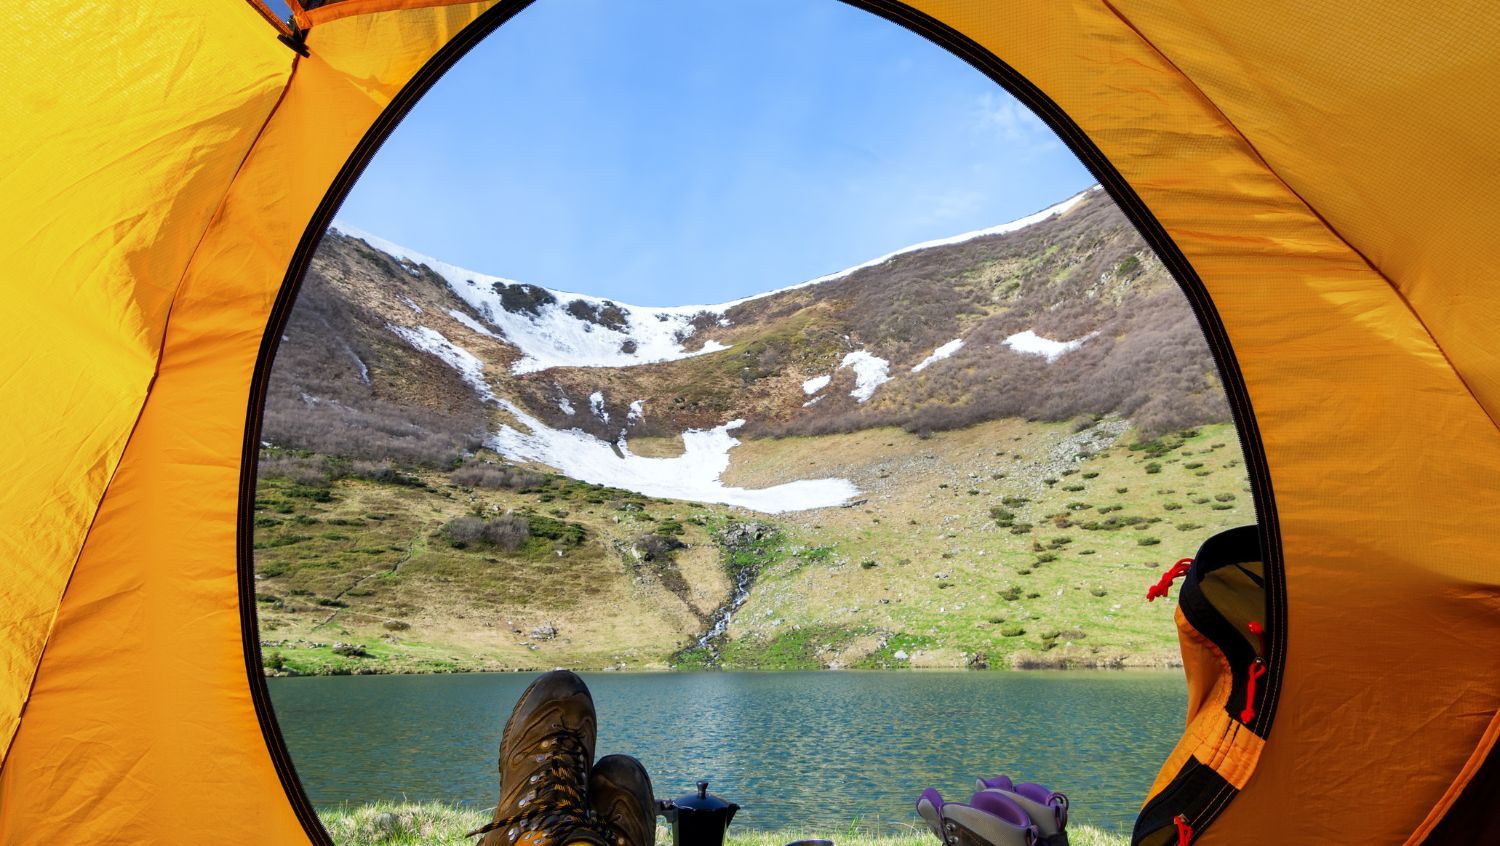 This view of a lake from inside a tent is what awaits you on your first time camping solo